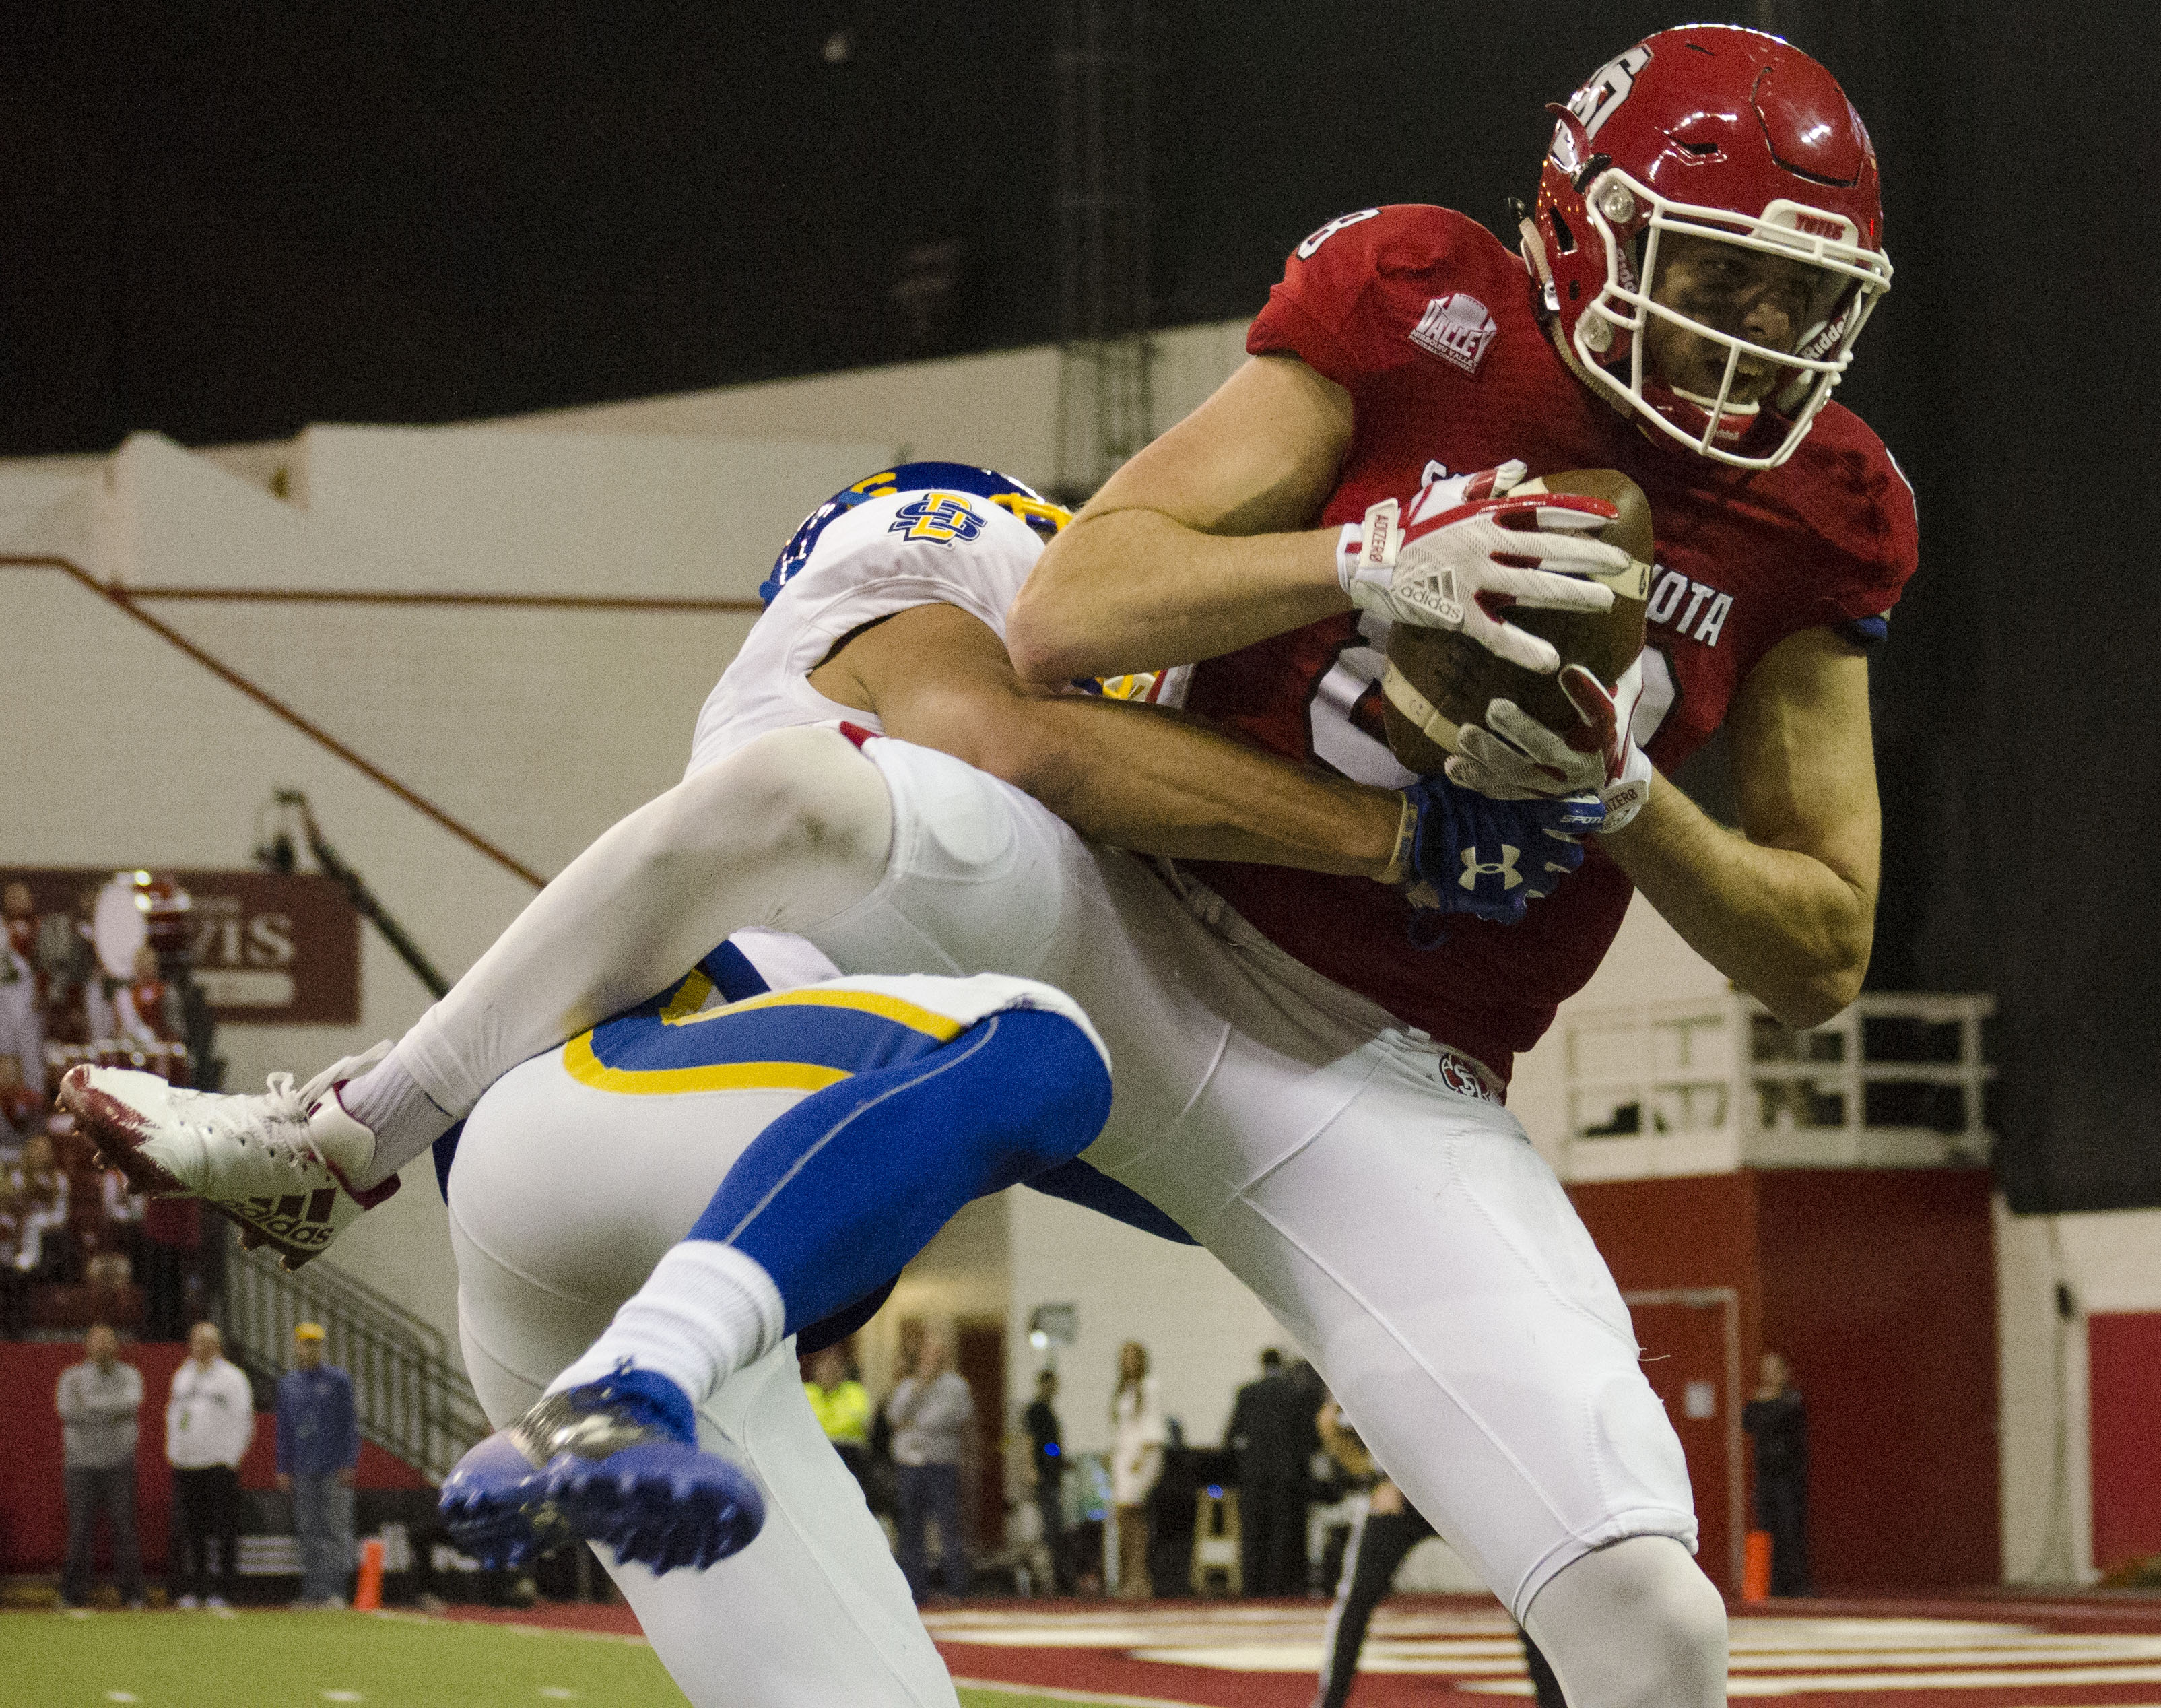 Photo gallery: Coyotes suffer close upset by rival SDSU